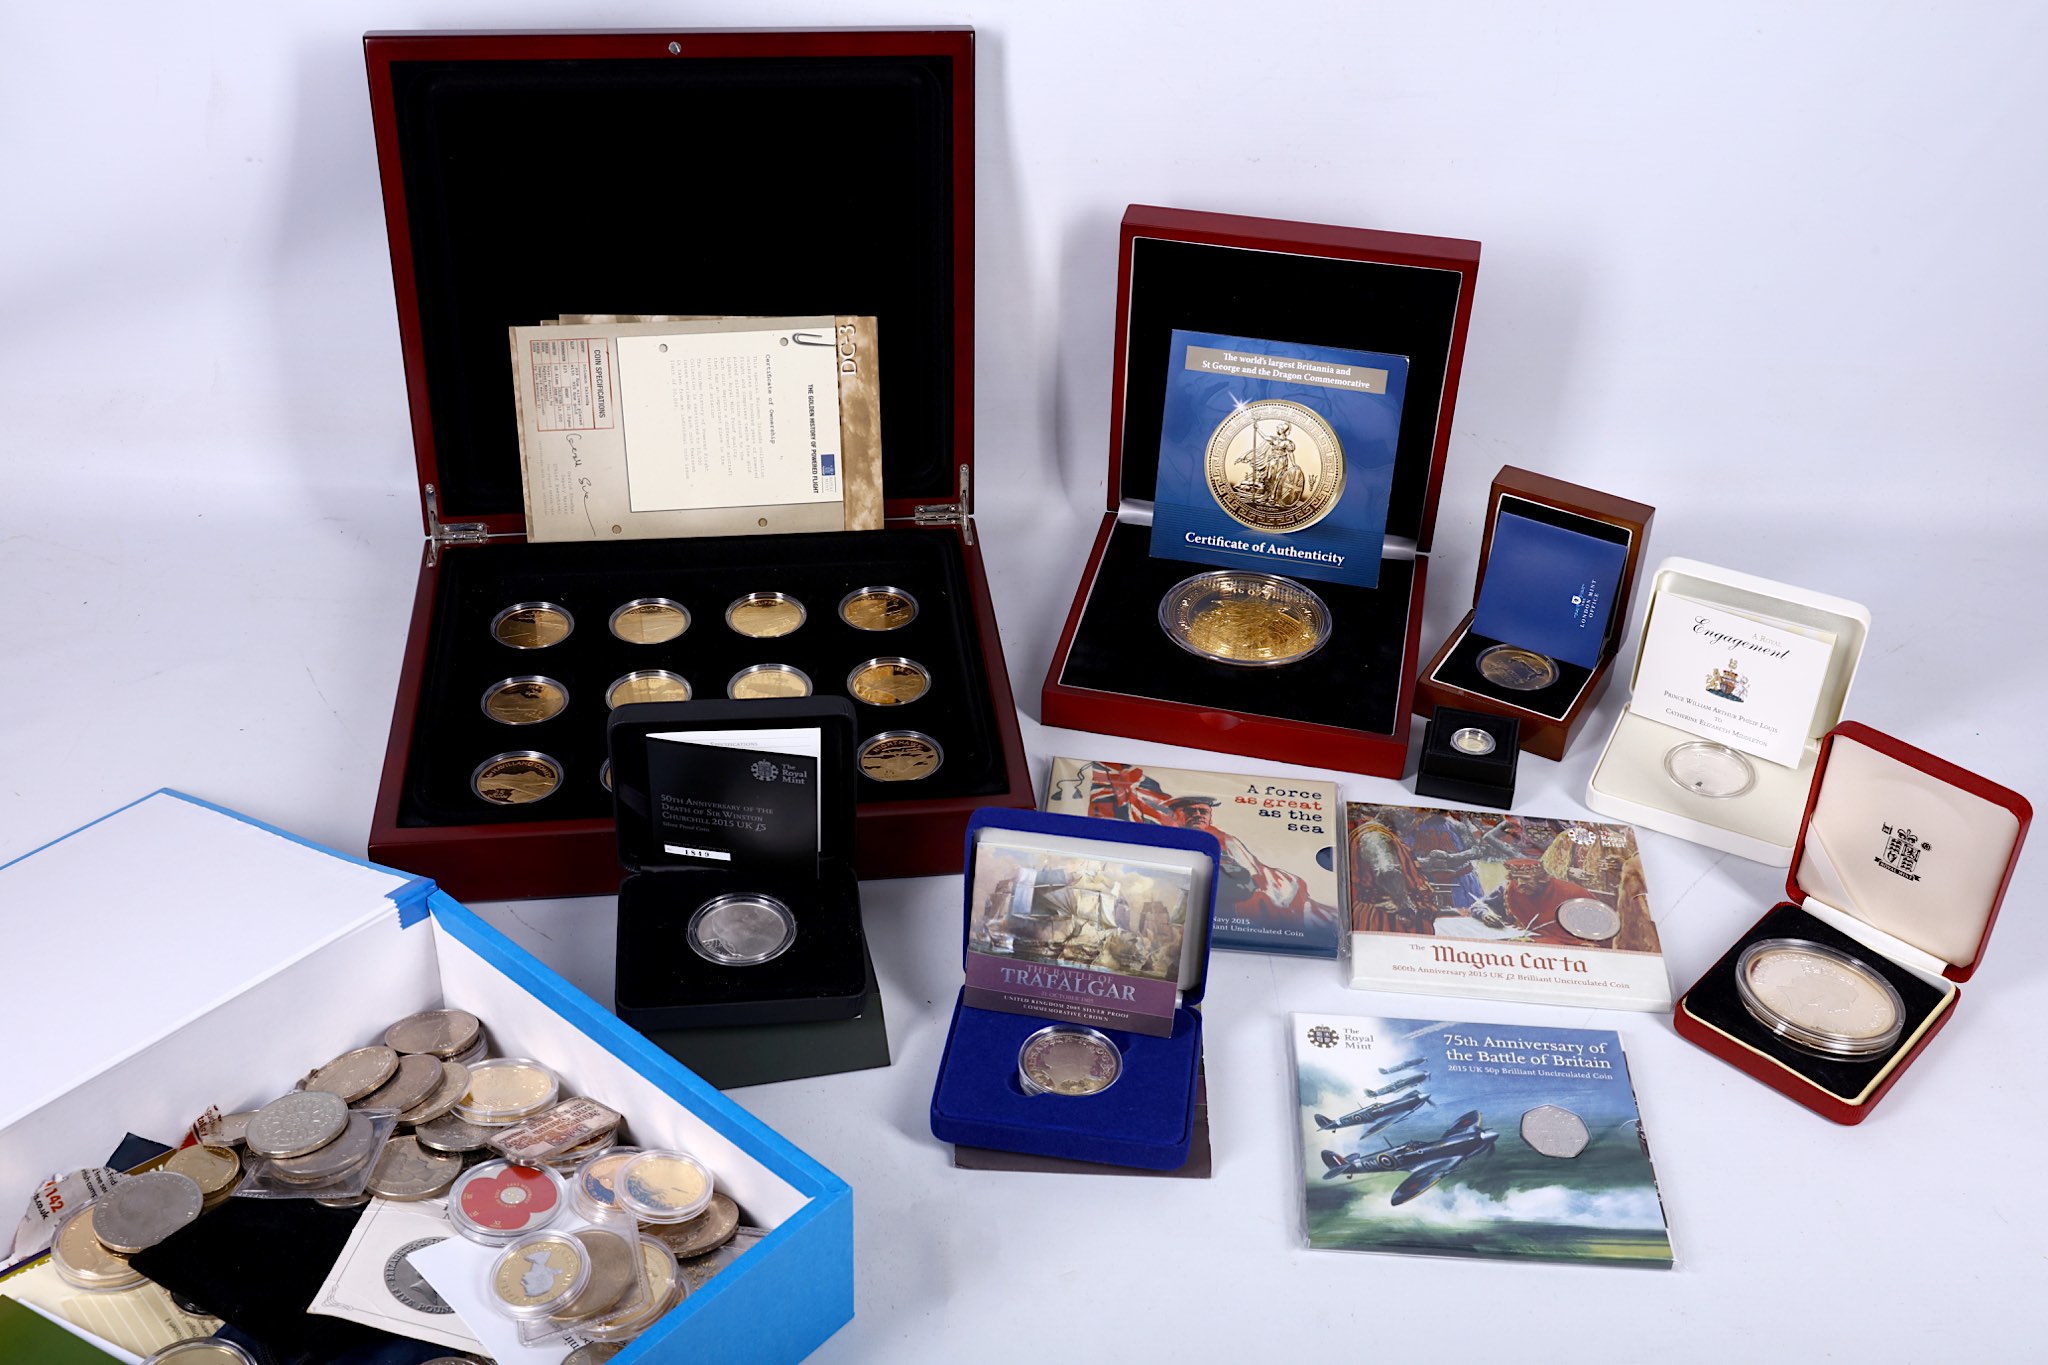 A mahogany cased set of 12 999 fine silver plated coins, with 999 fine gold coins to commemorate